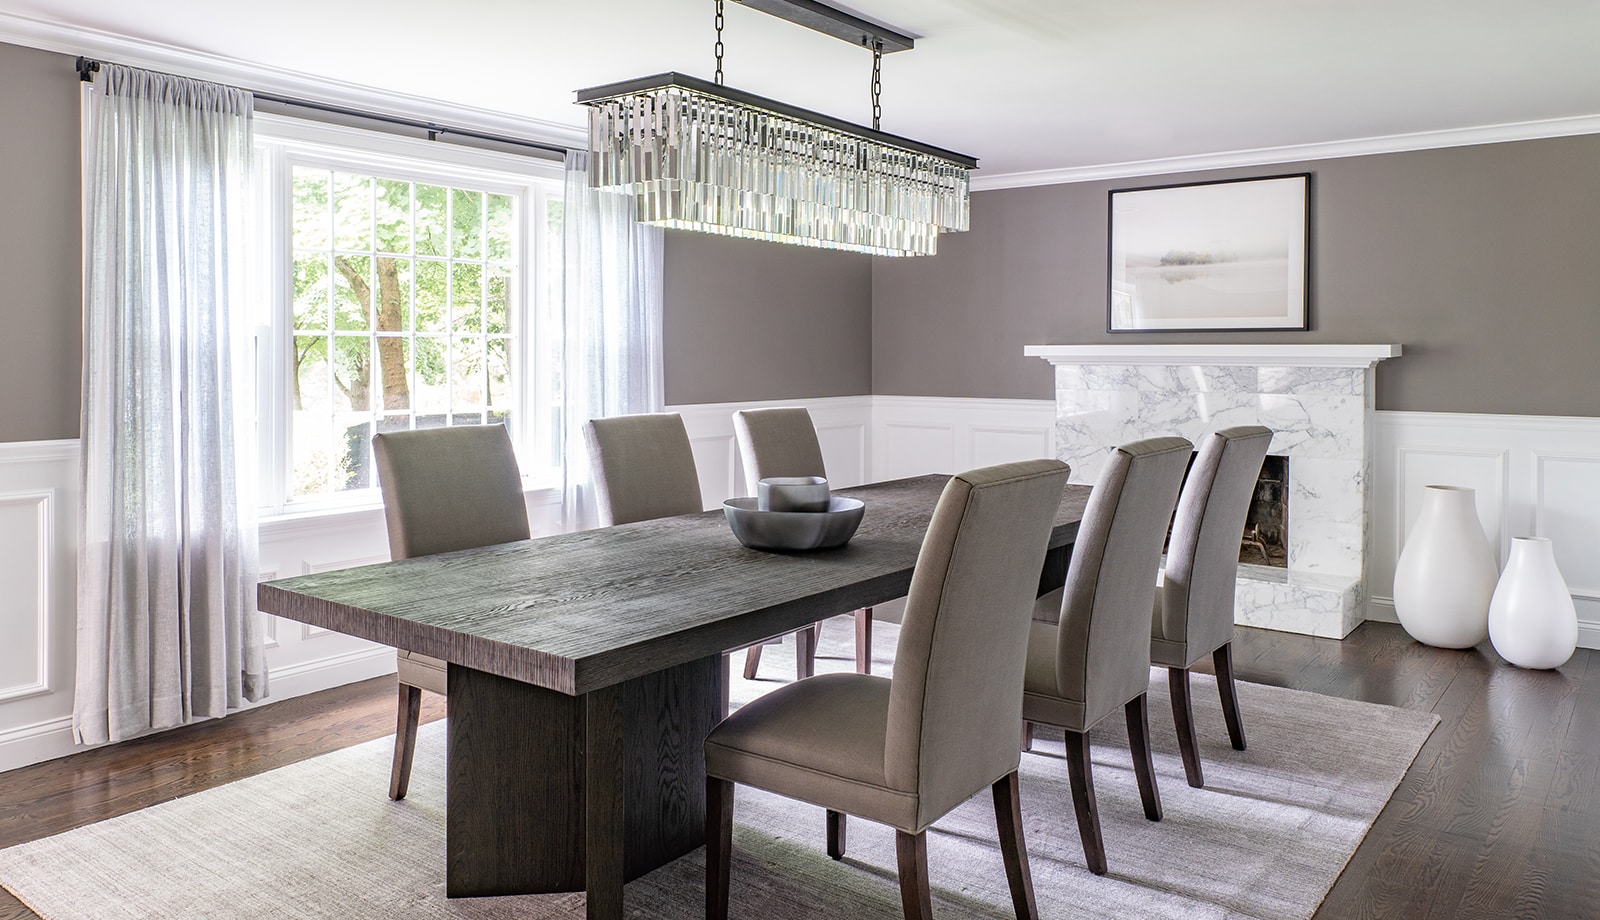 North Shore Tranquility Interiors Middleton MA Dining Room featured